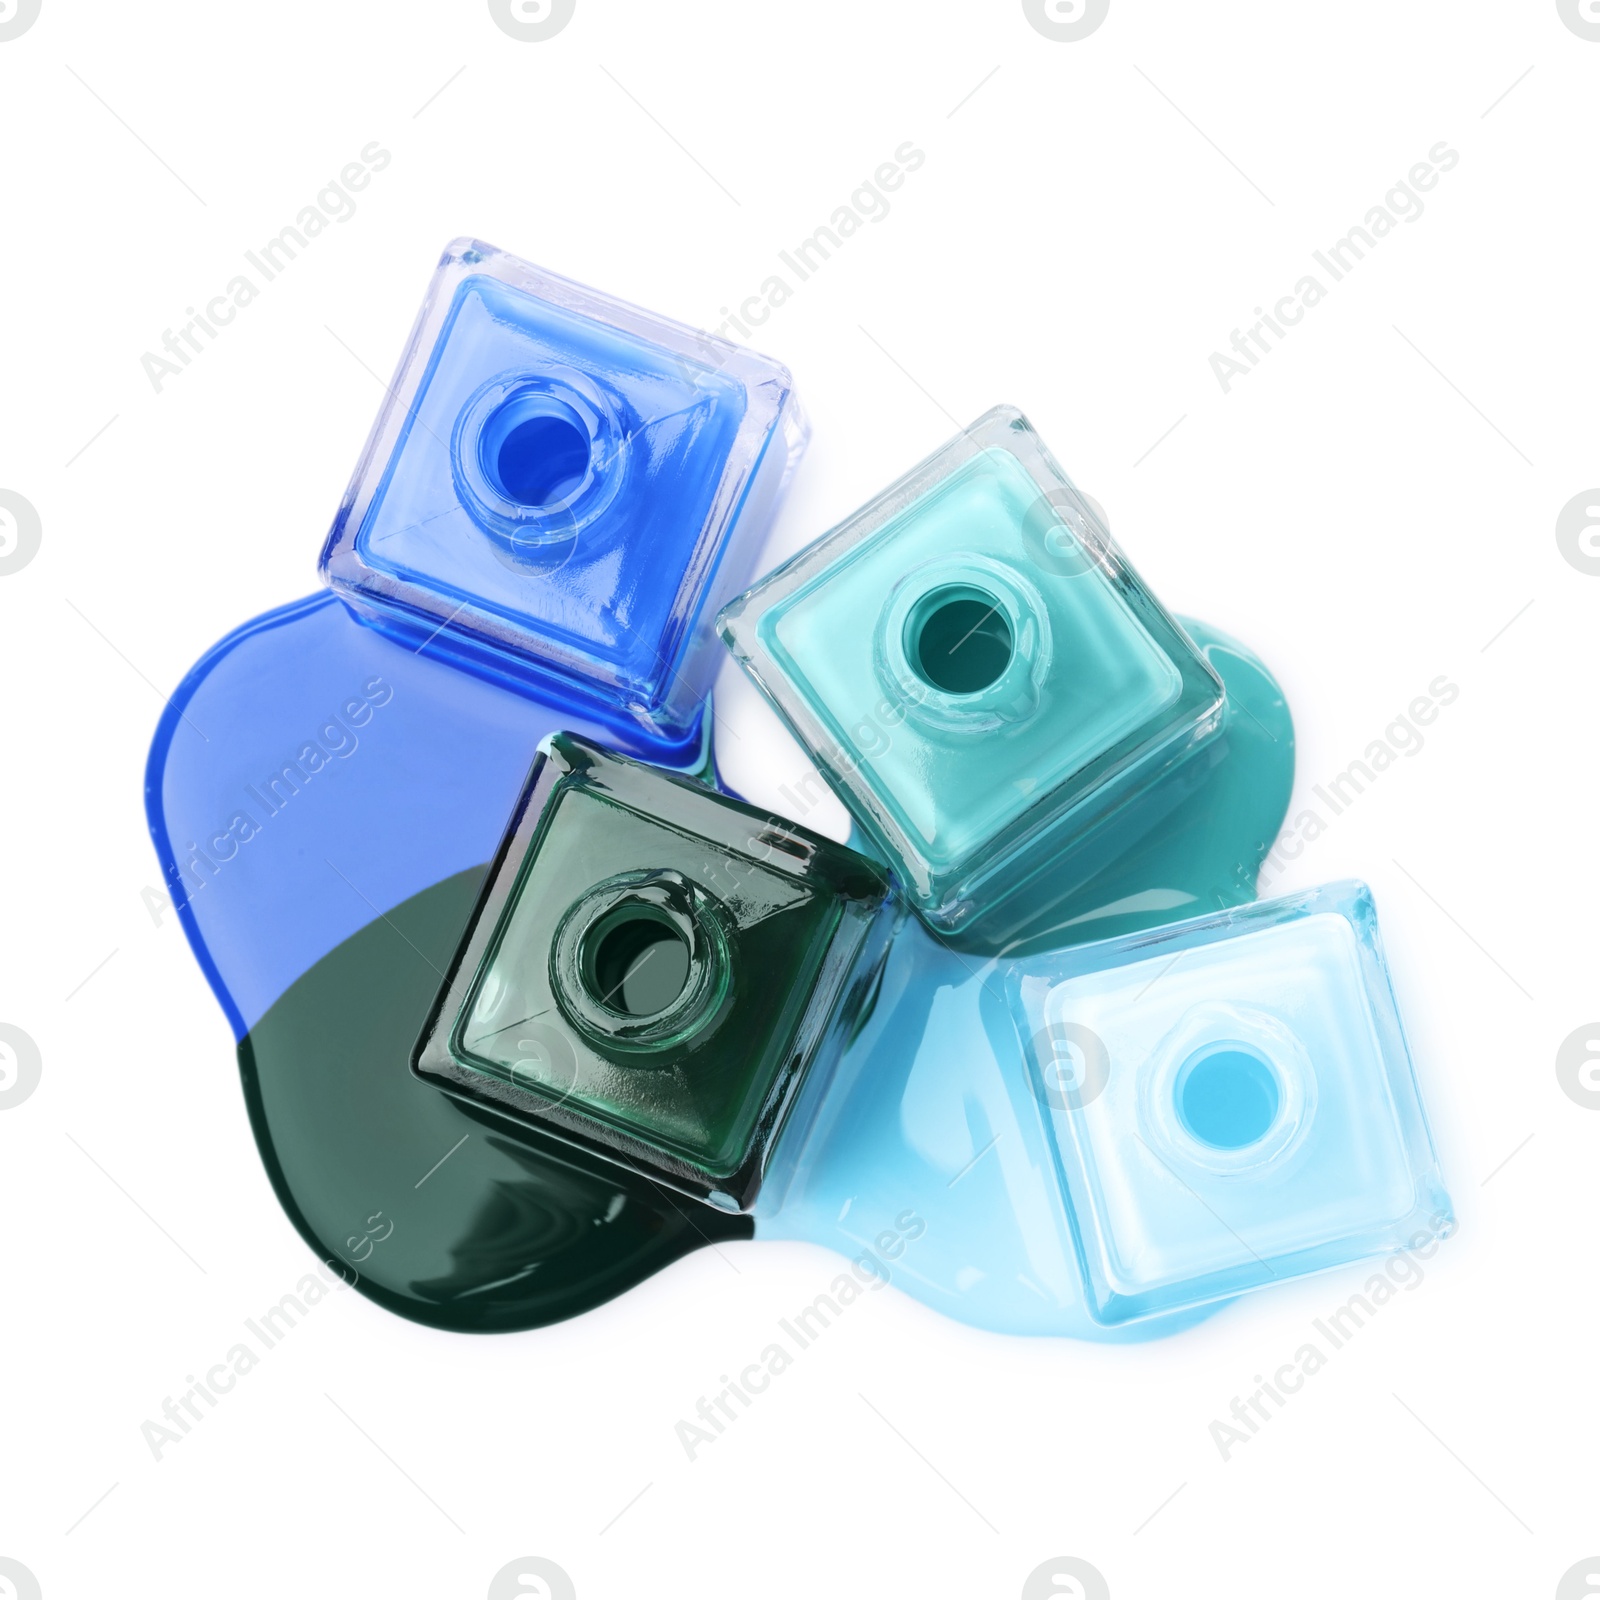 Photo of Puddle of different bright nail polishes and bottles isolated on white, top view